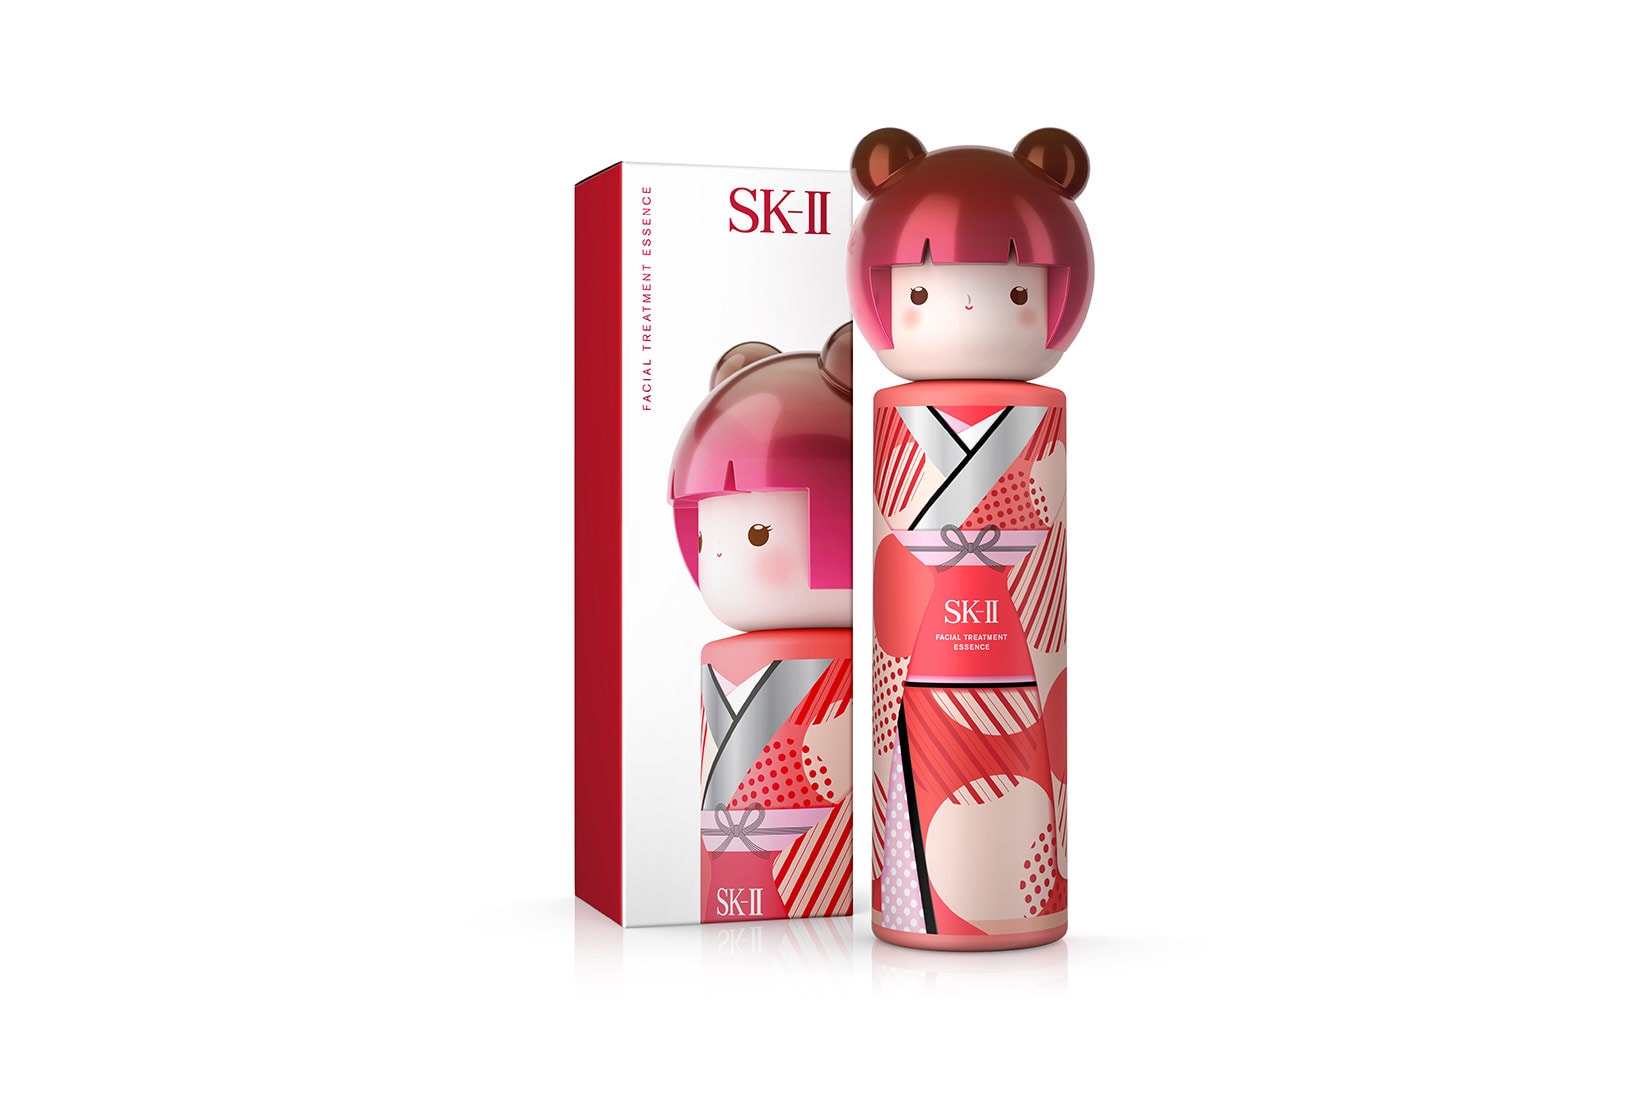 sk ii facial treatment essence serum fairy water limited edition bottle box front red kimono skincare